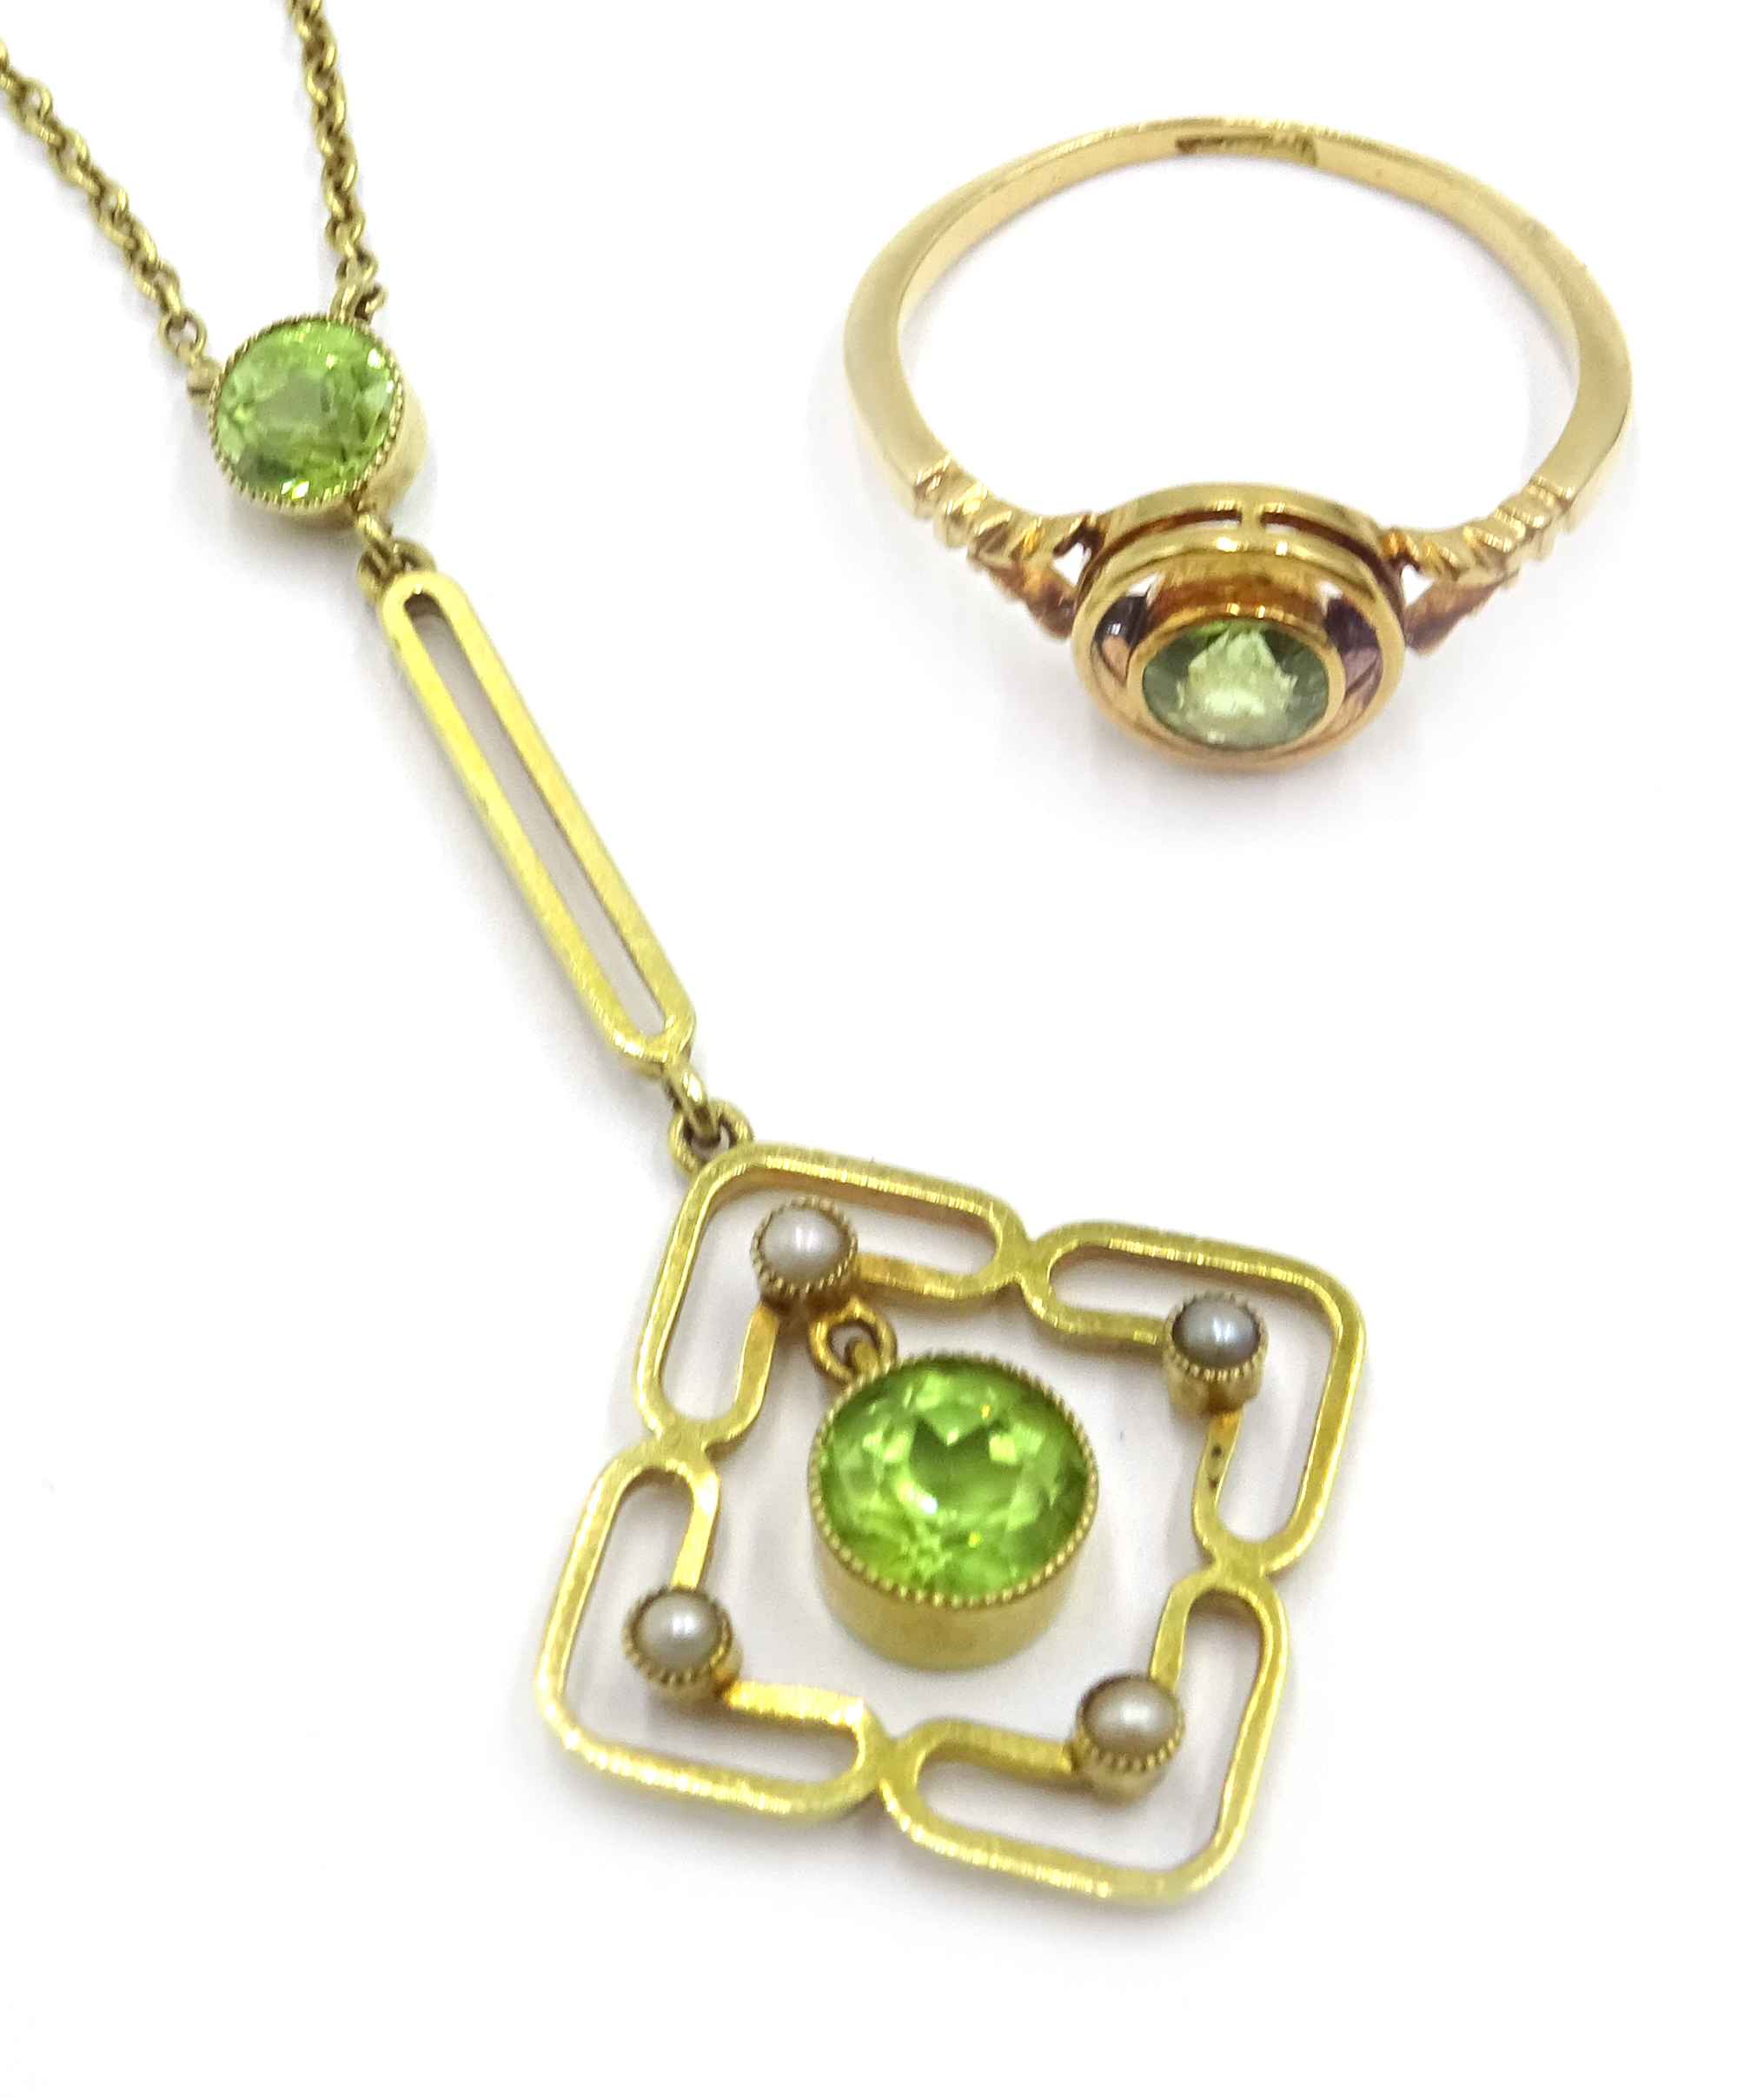 Edwardian peridot and seed pearl pendant necklace stamped 15ct and a similar rose gold ring stamped